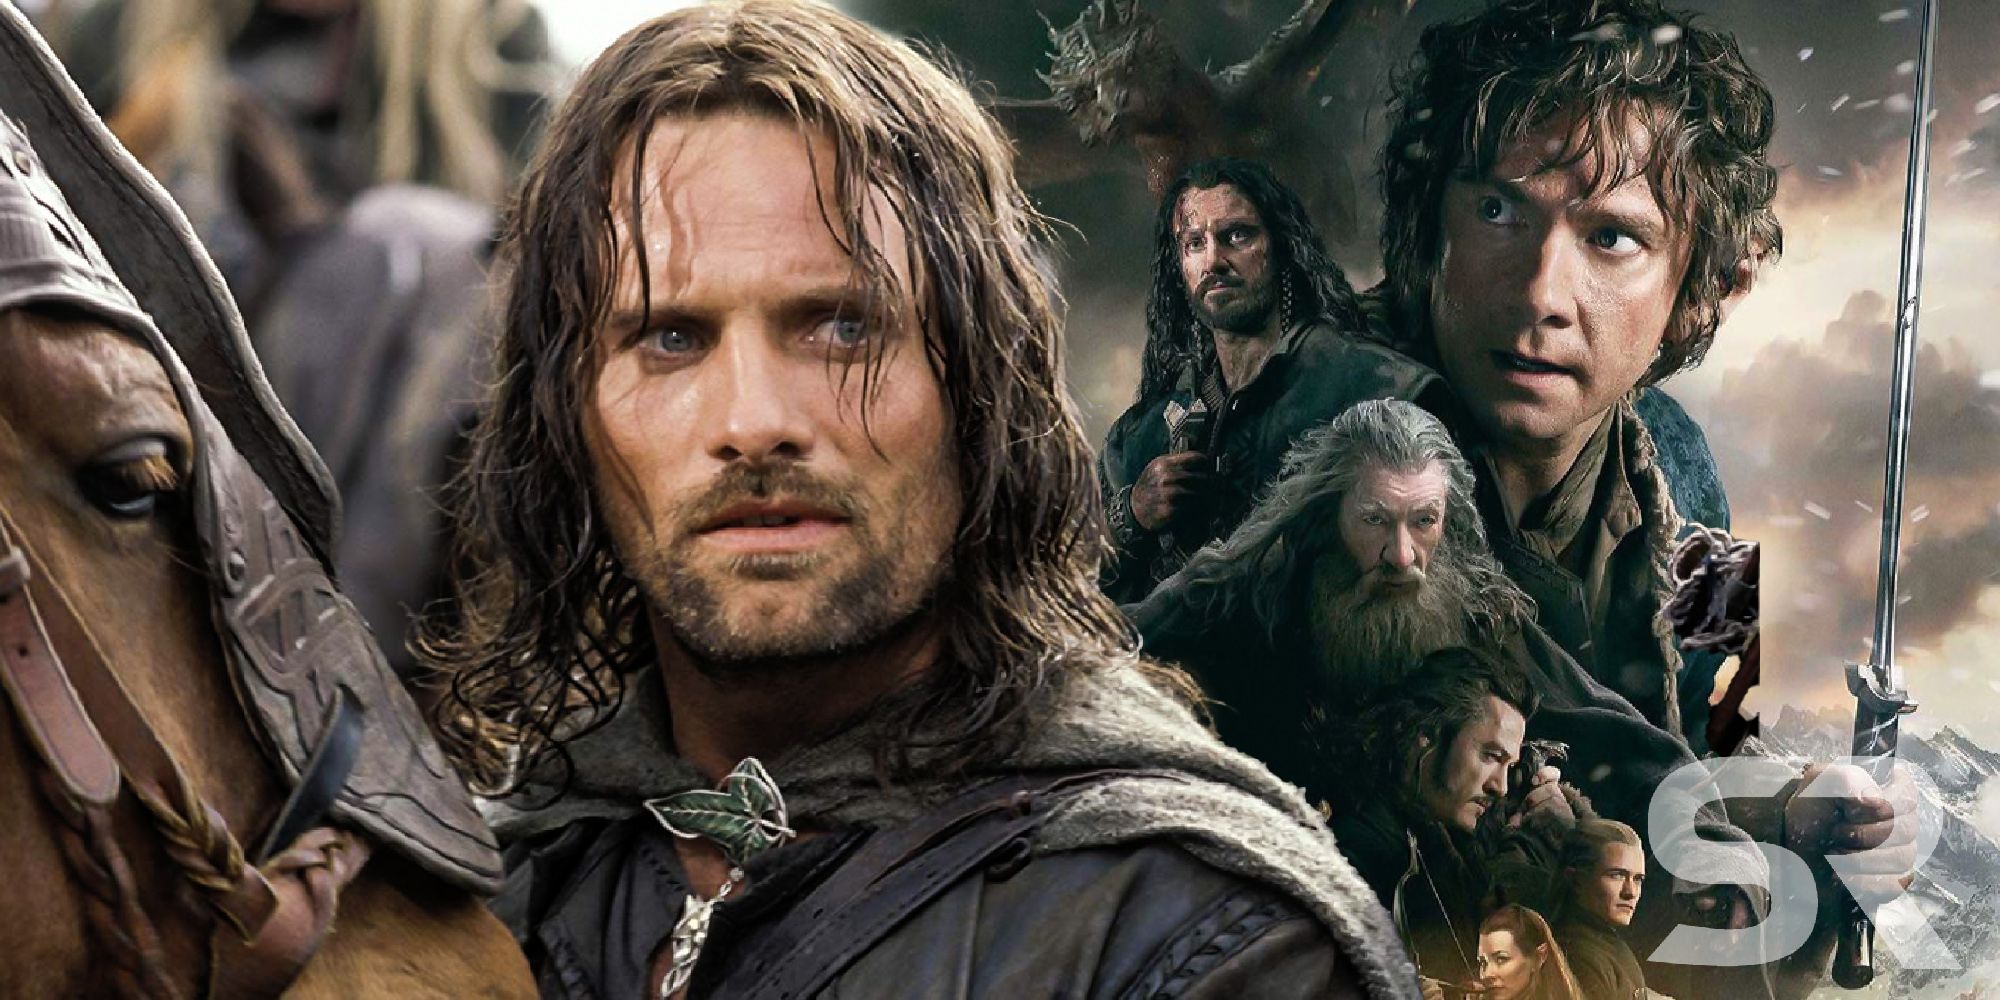 How to watch all The Lord of the Rings movies in order | The Digital Fix